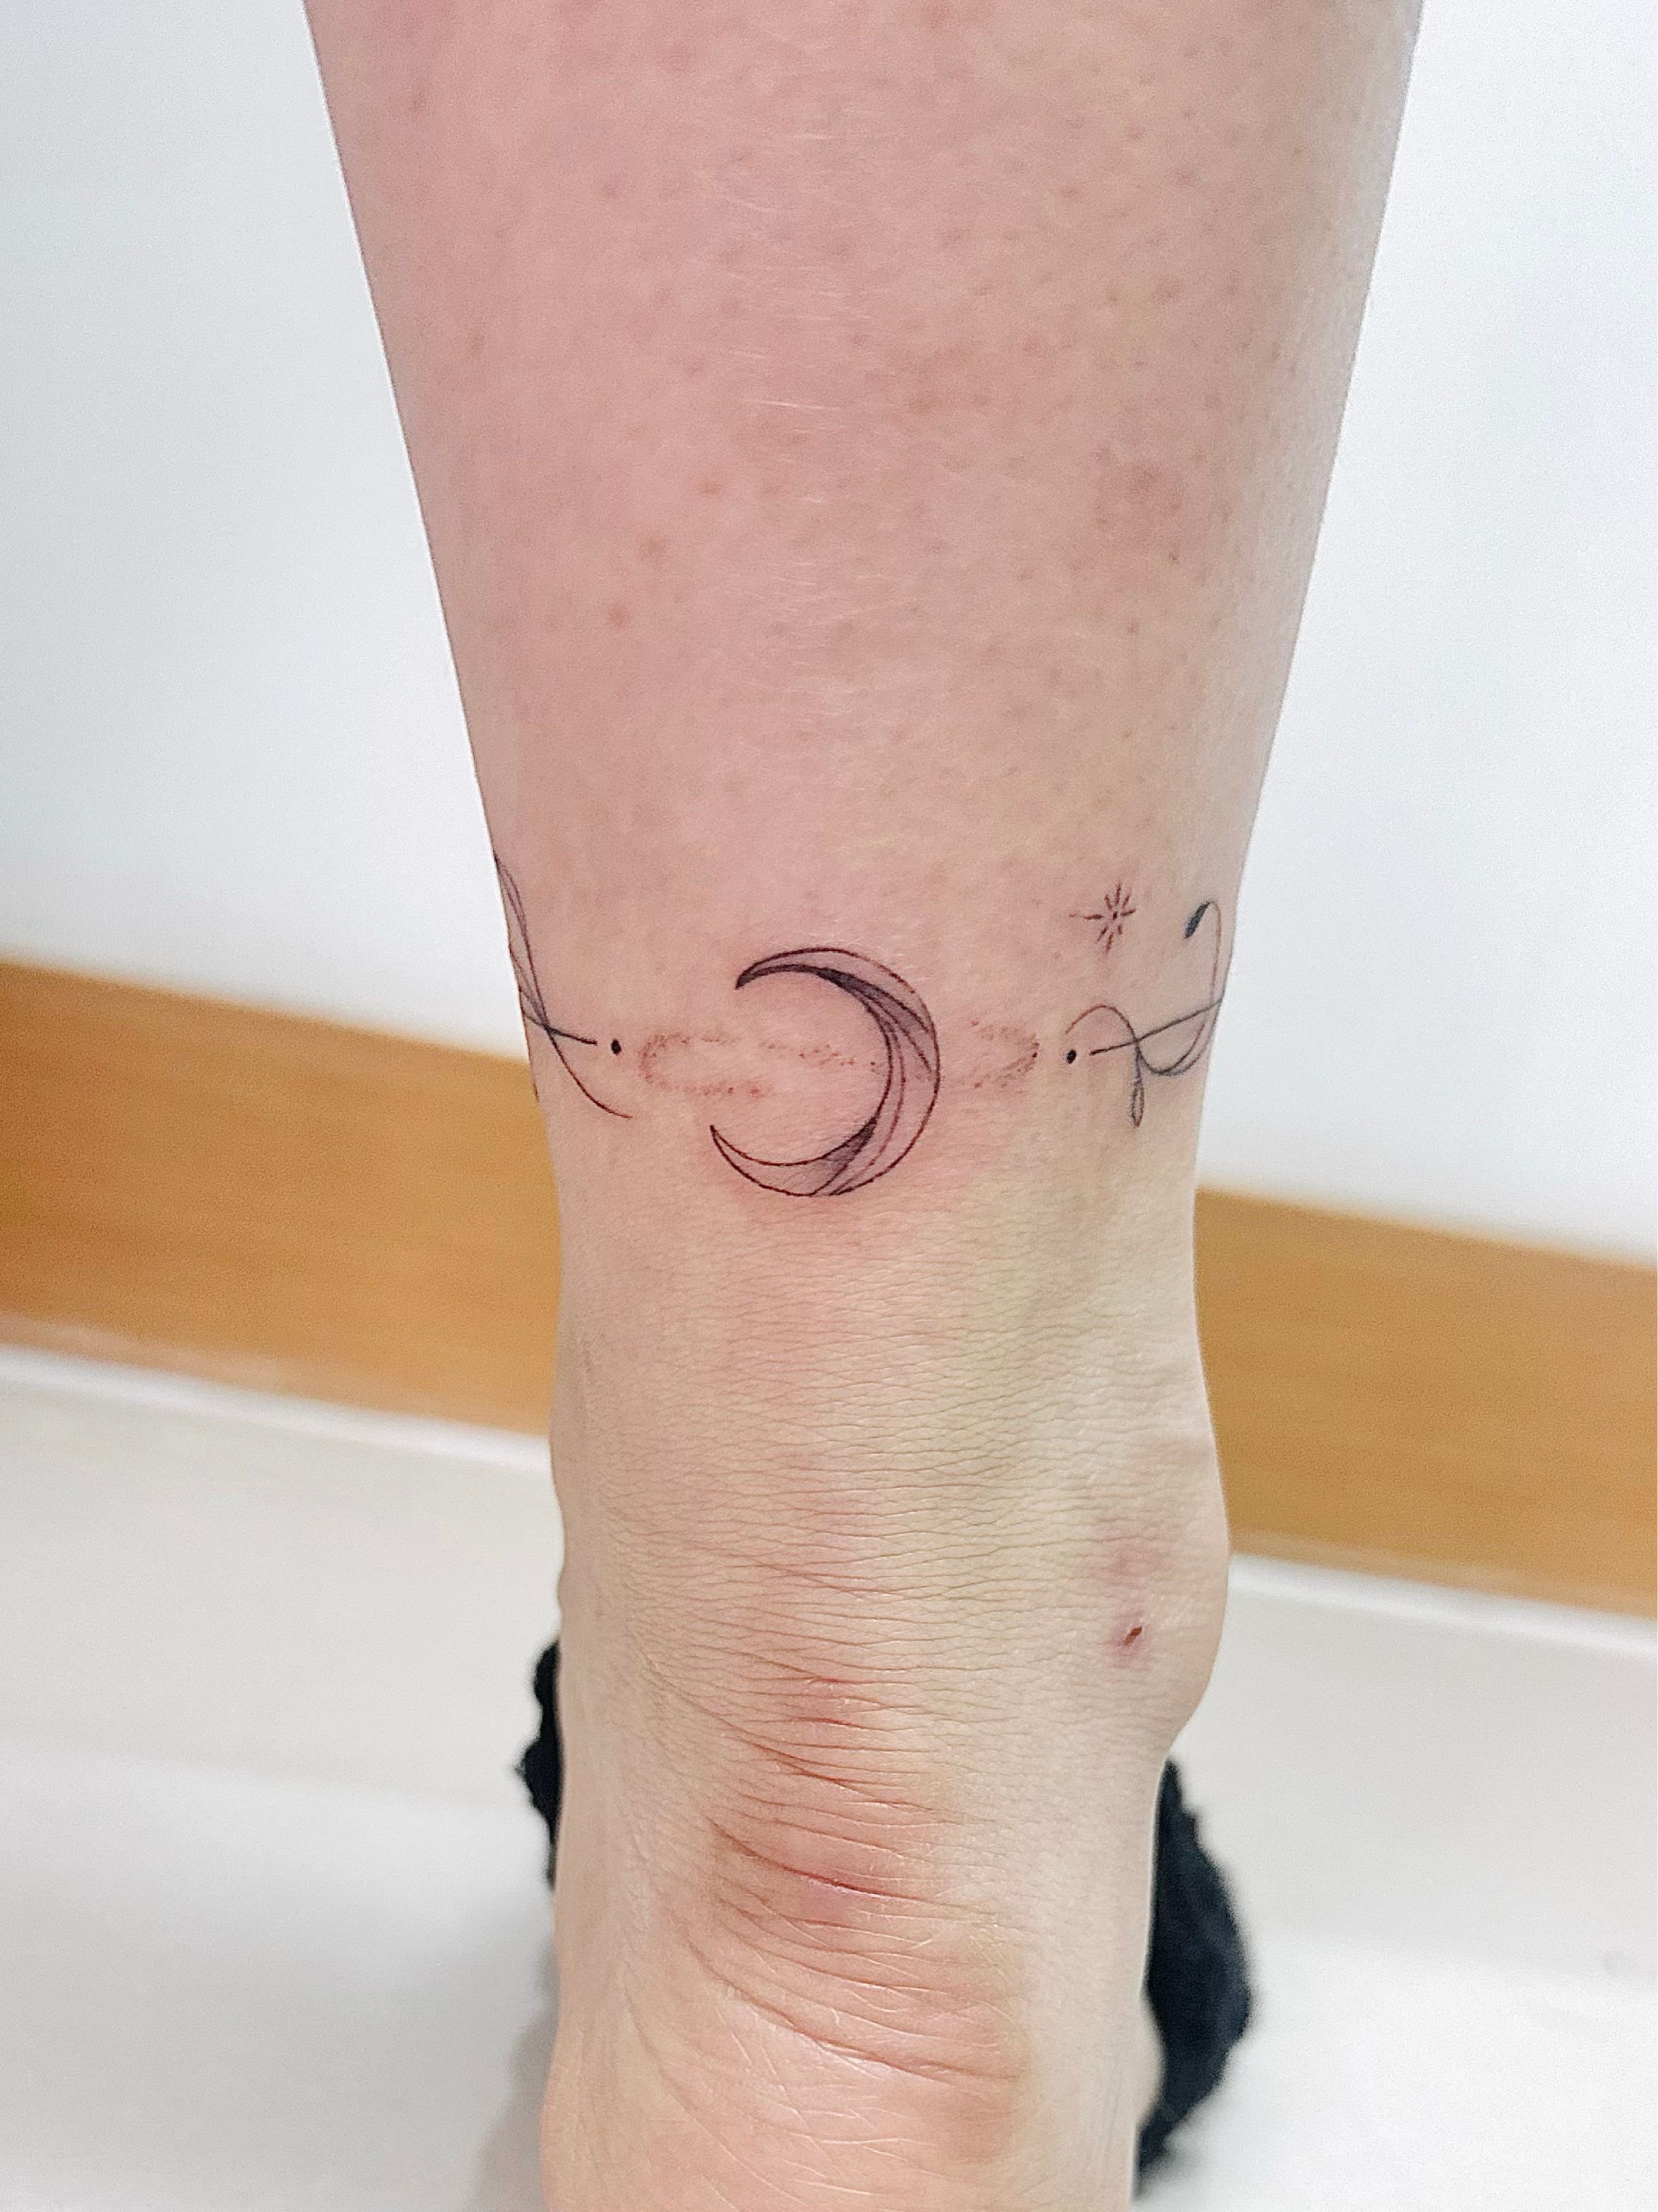 Tracie wanted to take her old moon tattoo and refresh it… we definitely  refreshed it and added some more freehand vines 💚🩷💚�... | Instagram